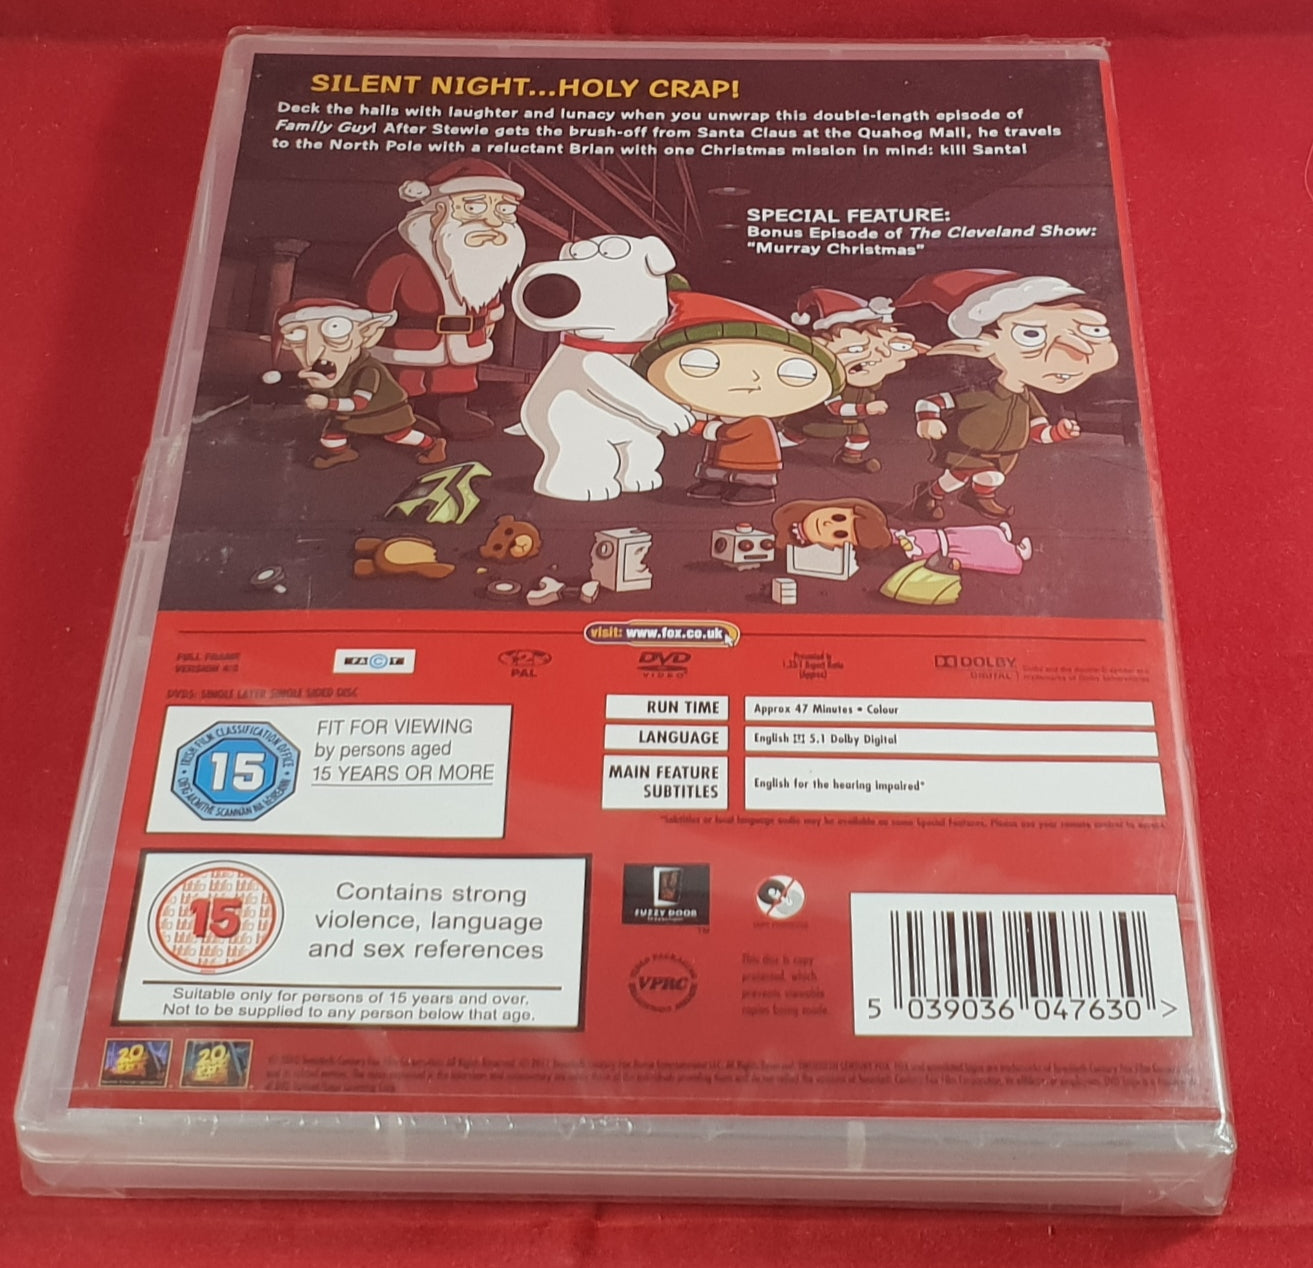 Brand New and Sealed Family Guy Presents Road to the North Pole DVD